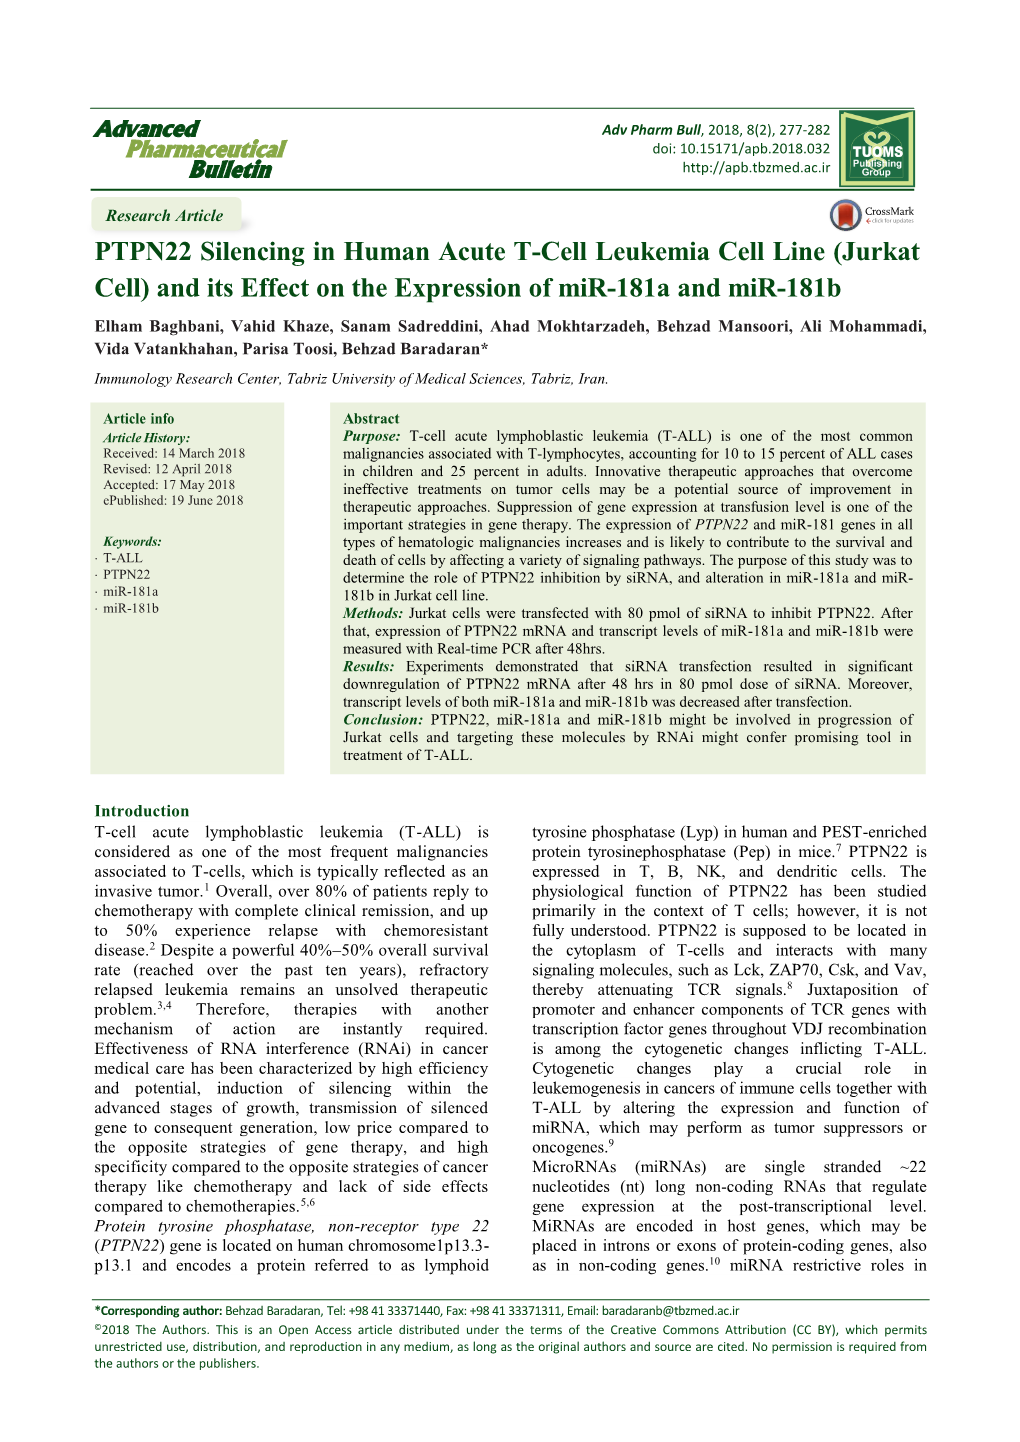 PTPN22 Silencing in Human Acute T-Cell Leukemia Cell Line (Jurkat